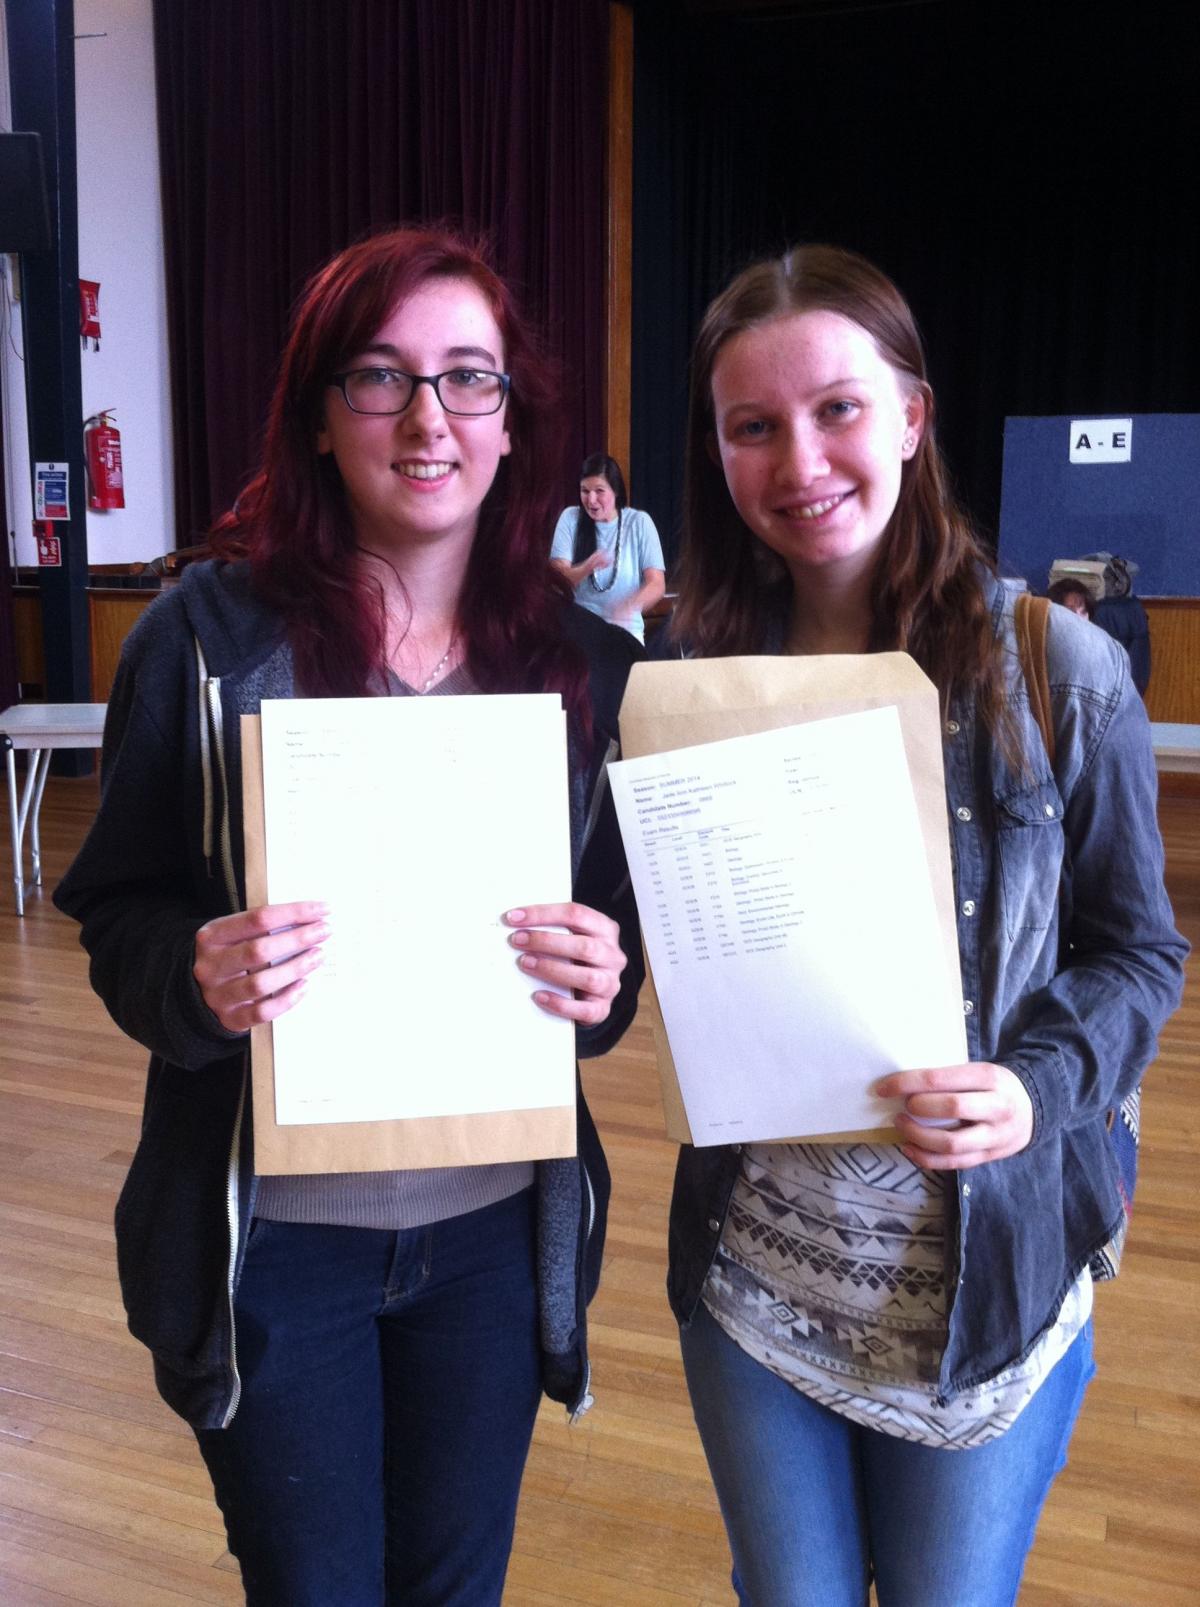 A Level results day 2014 at Parkstone Grammar